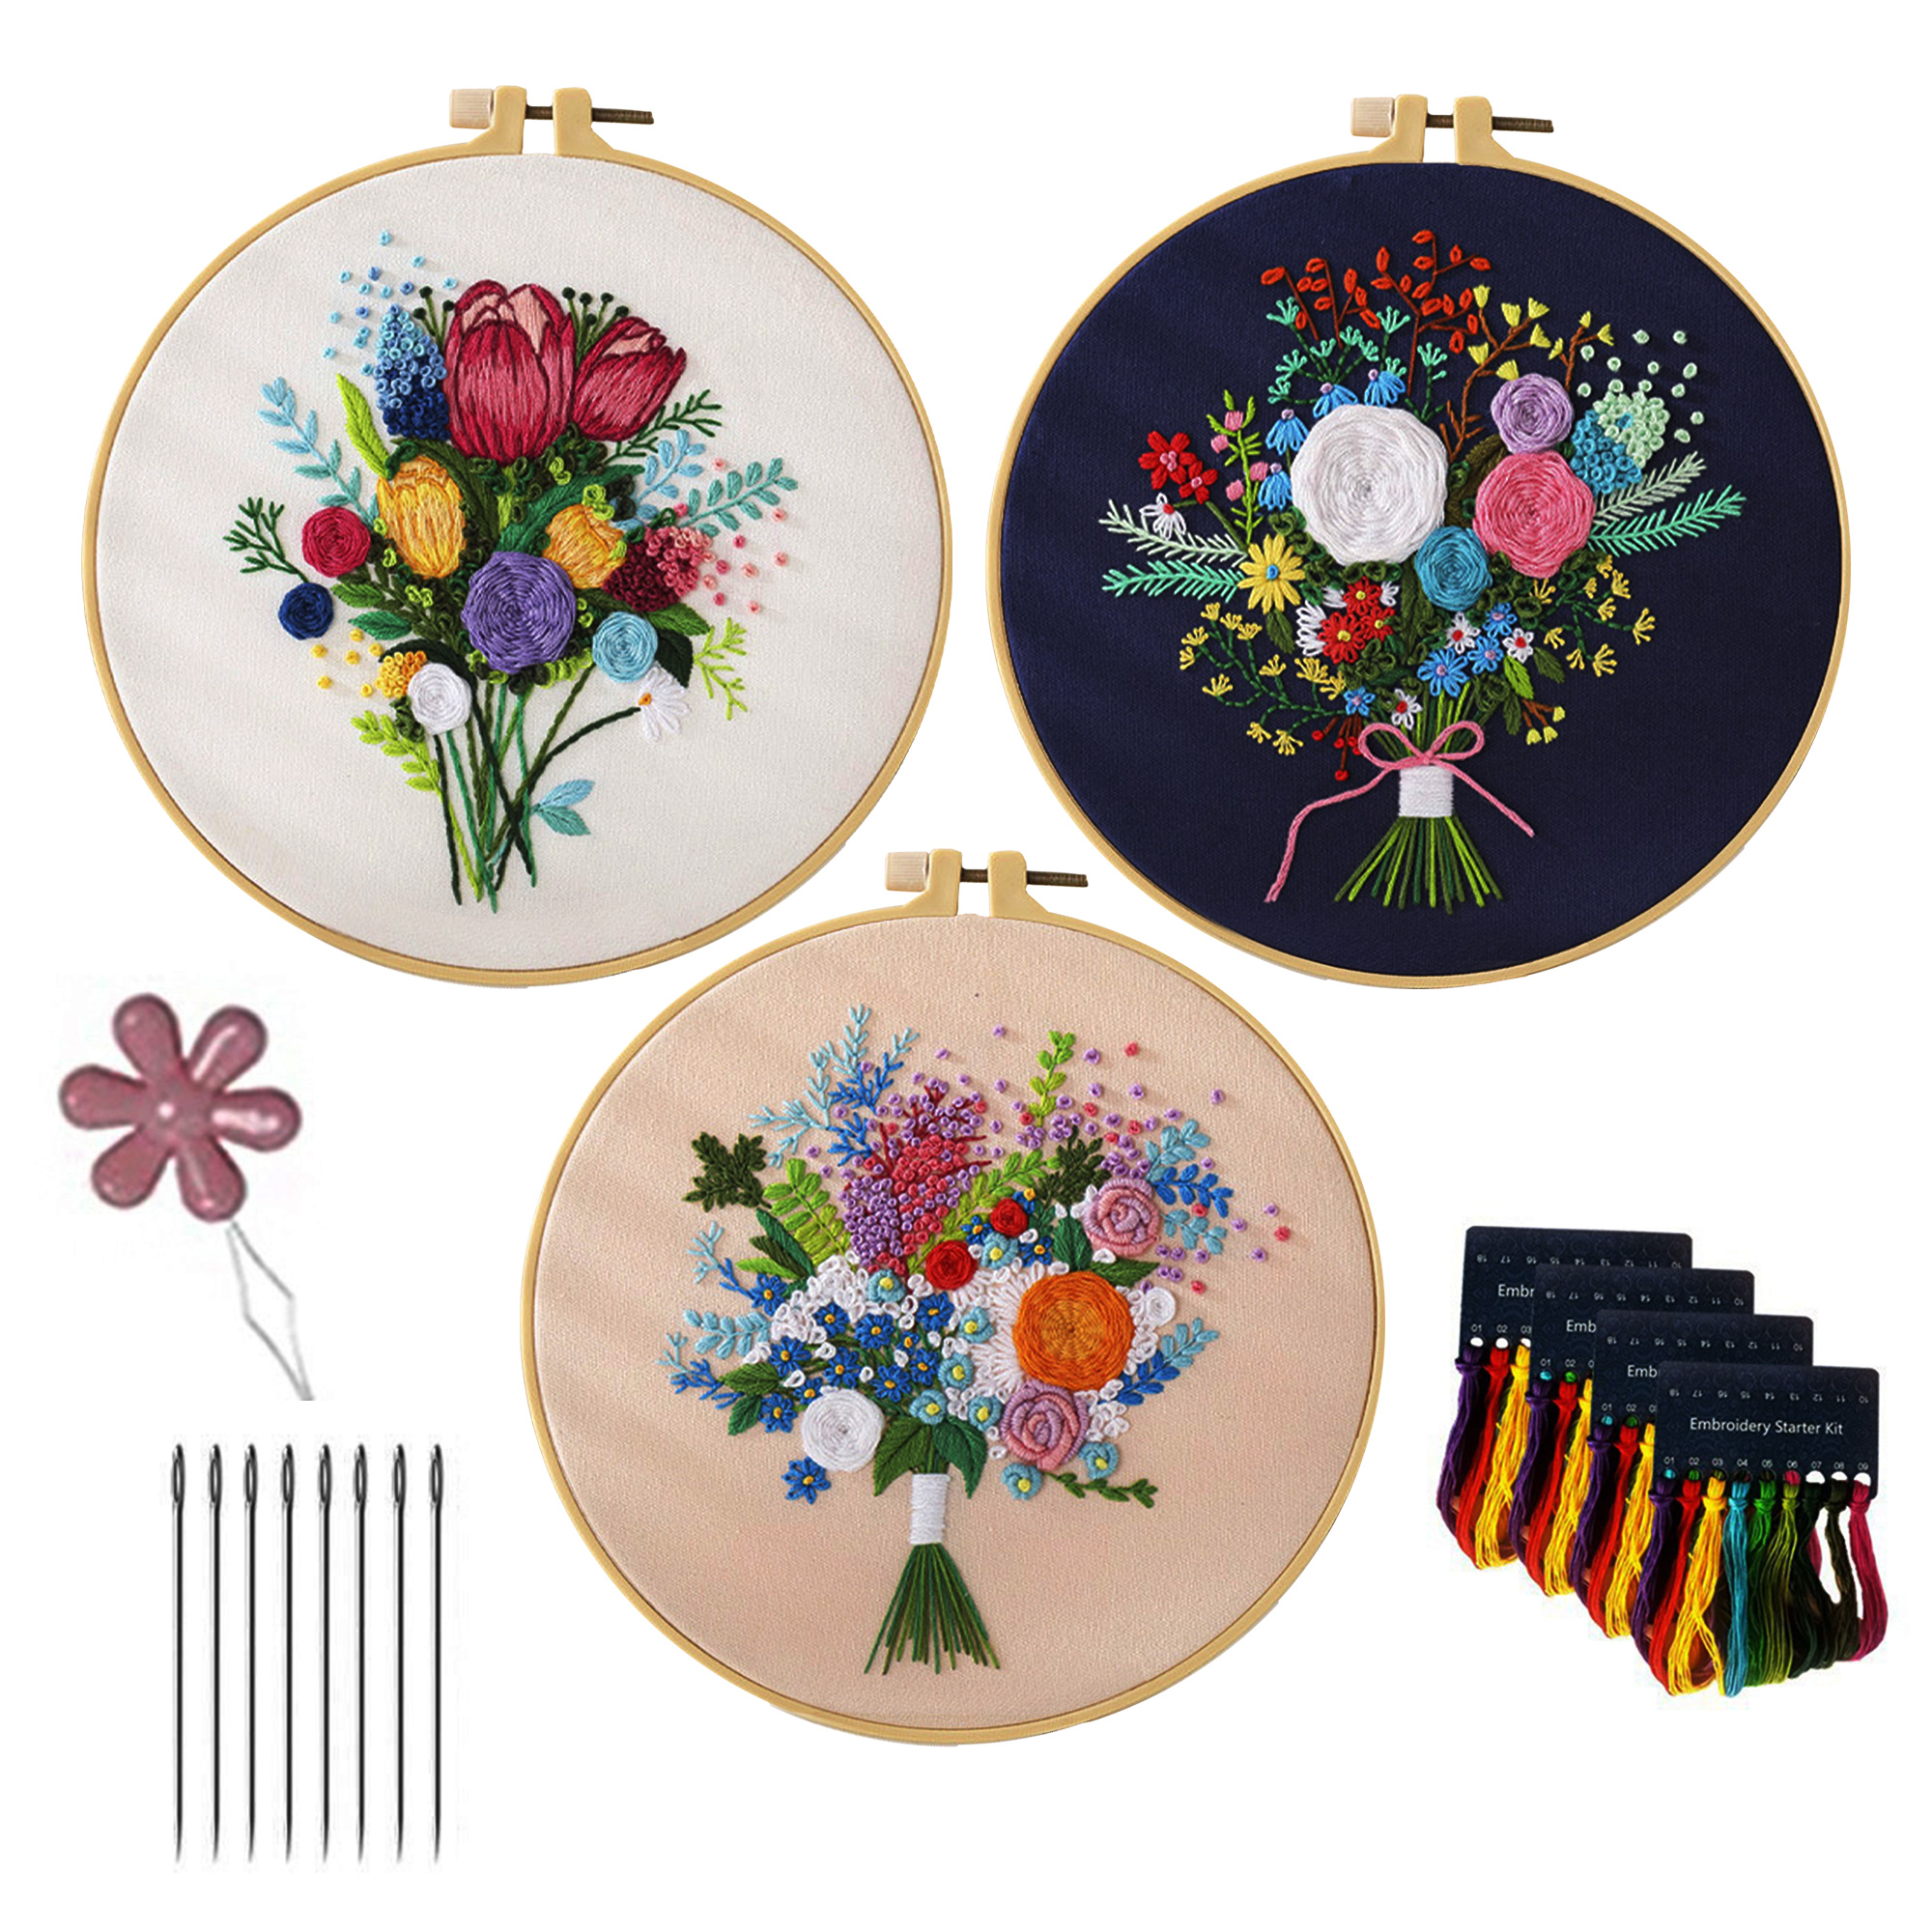 Blingpainting 3PC Handheld Flower Embroidery - Easy-to-Use, Portable,  Beautiful Designs, Embroidery Kit for Art Craft Handy Sewing, Perfect for  DIY